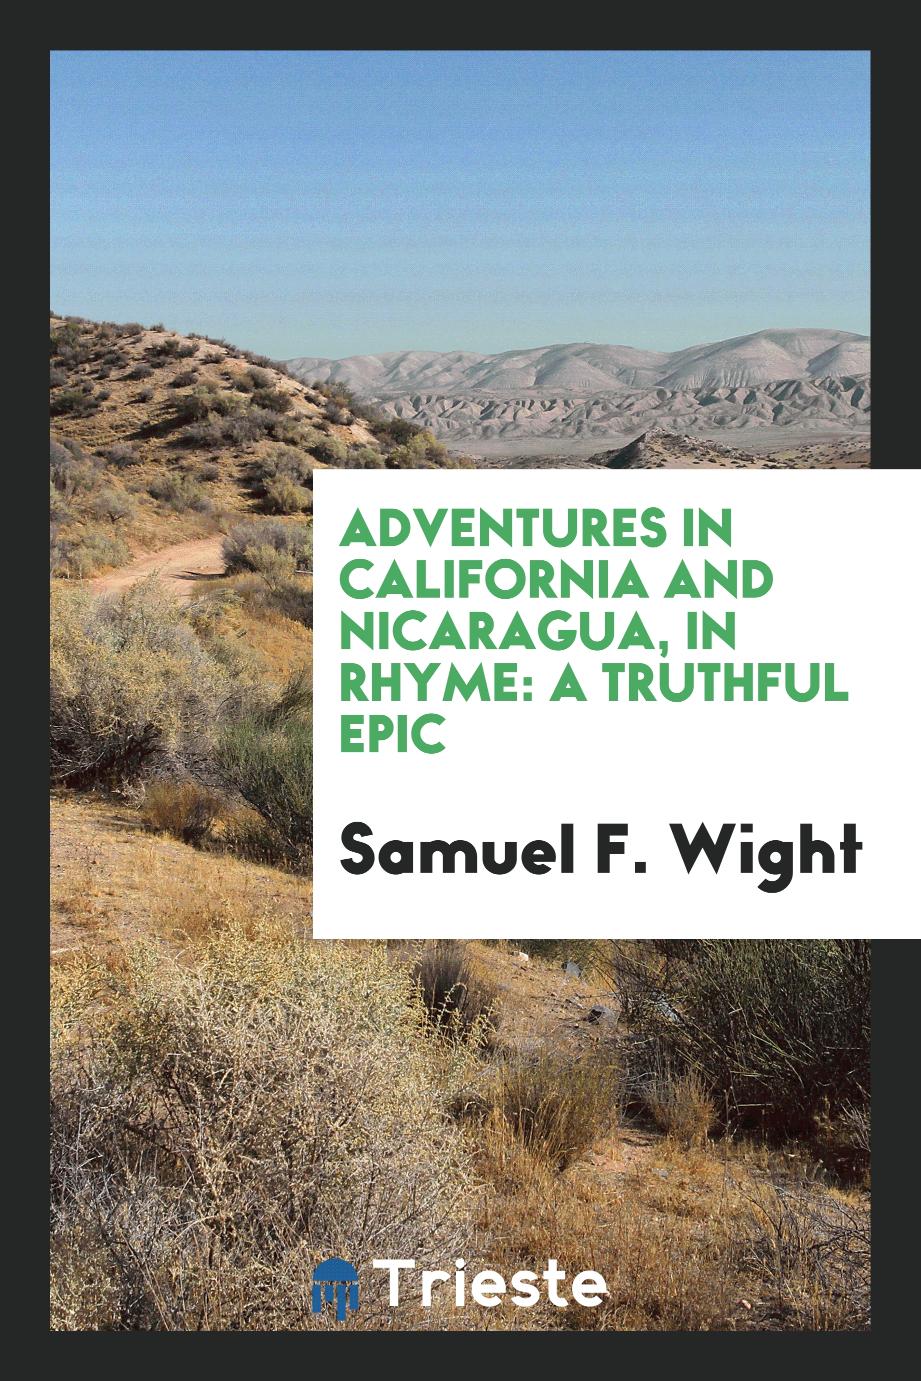 Adventures in California and Nicaragua, in Rhyme: A Truthful Epic